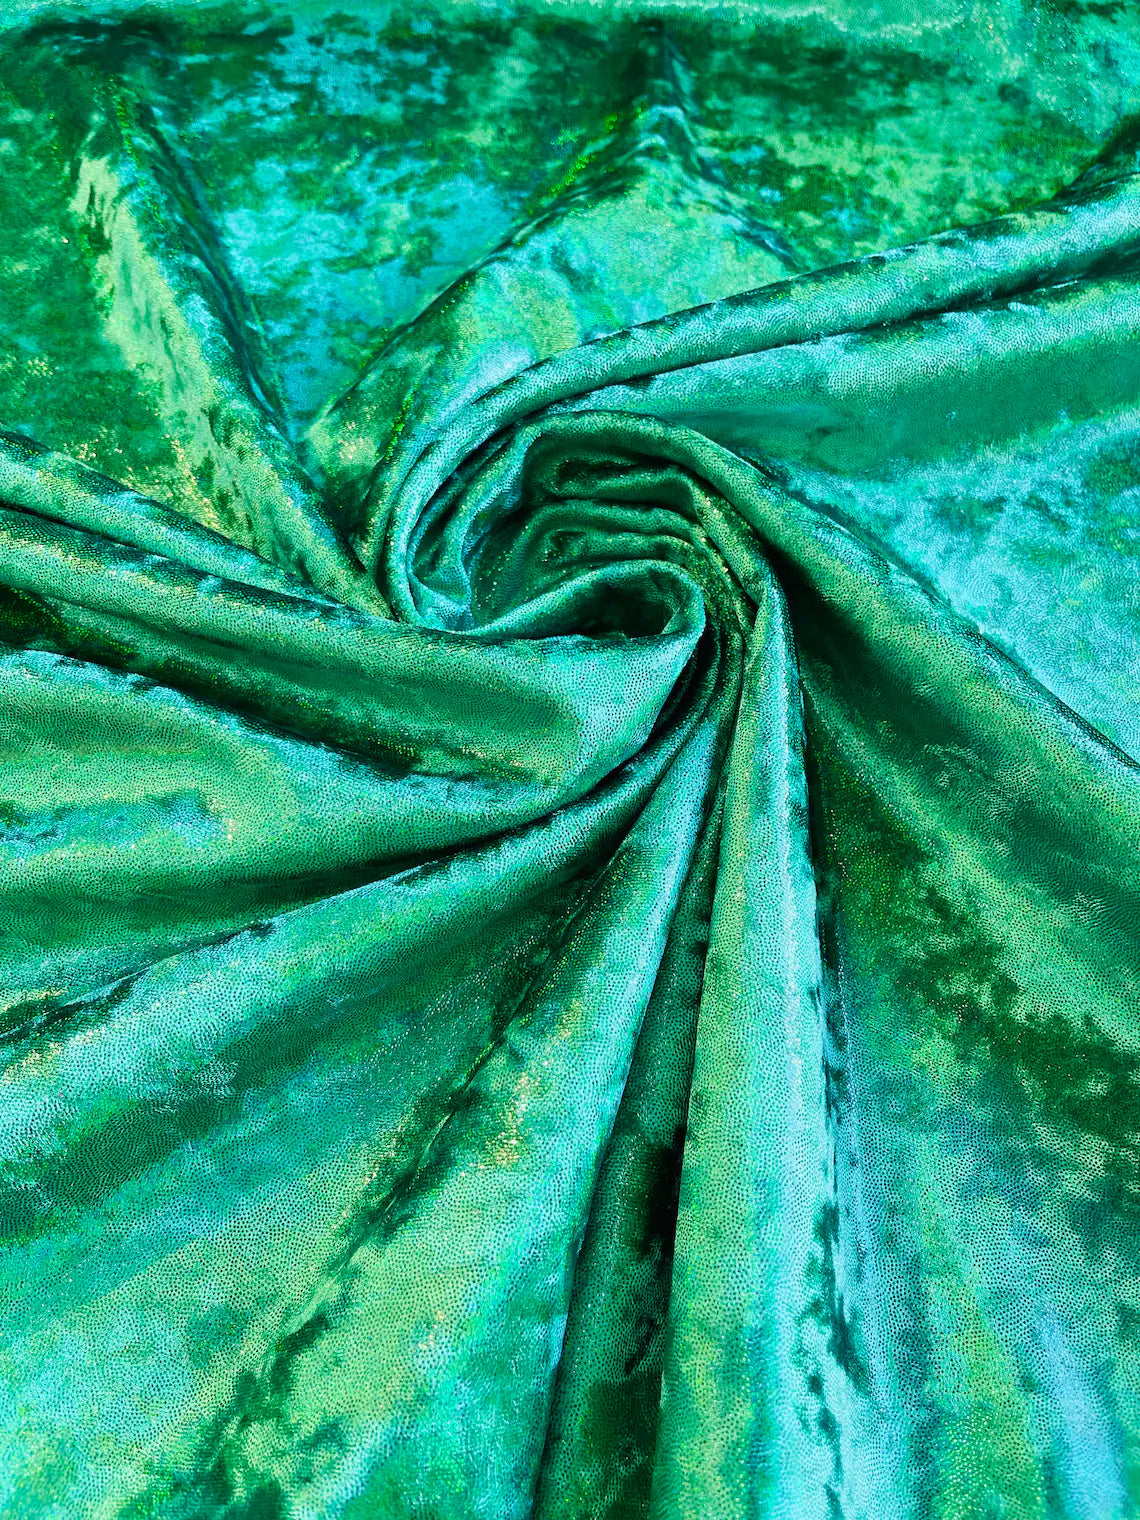 Stretch Velvet Fabric By The Yard